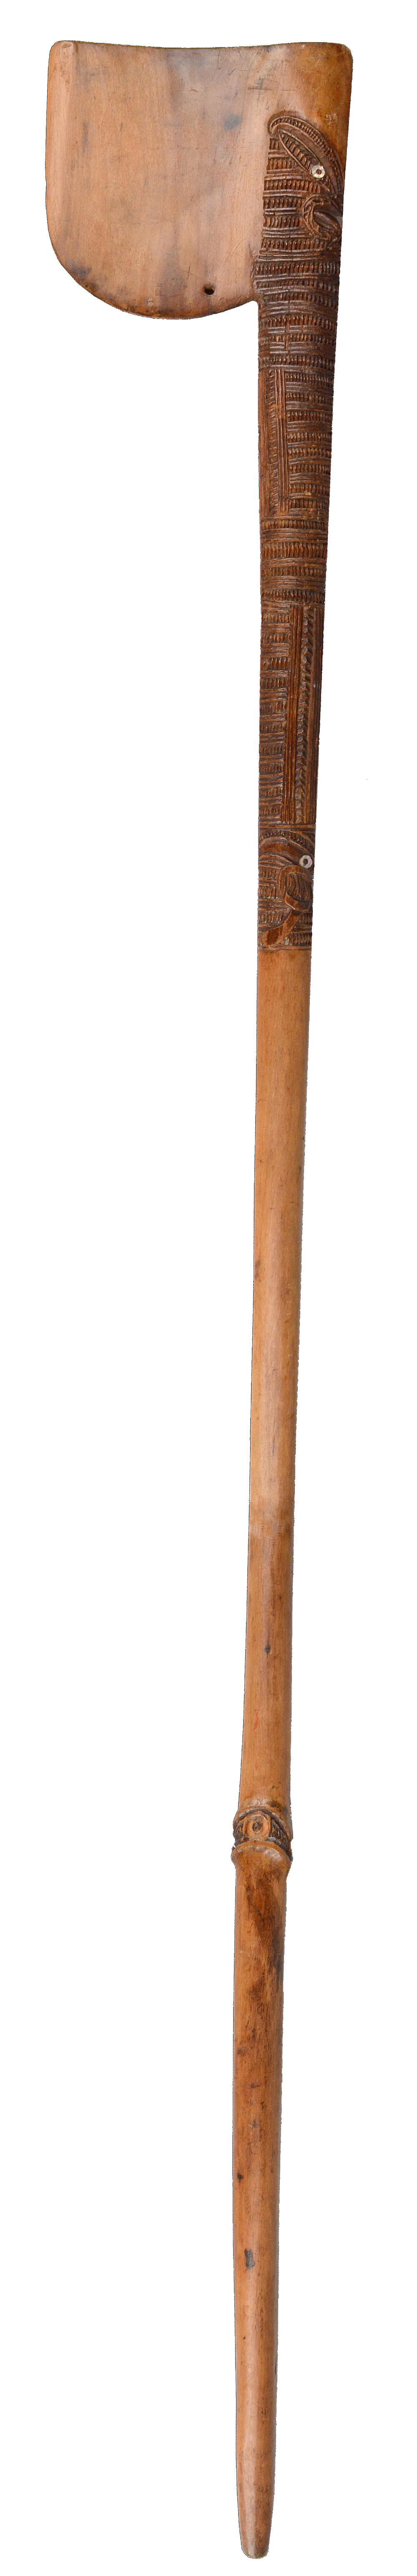 A Maori tewhatewha club New Zealand with a rounded blade, pierced for attachment, with carved linear